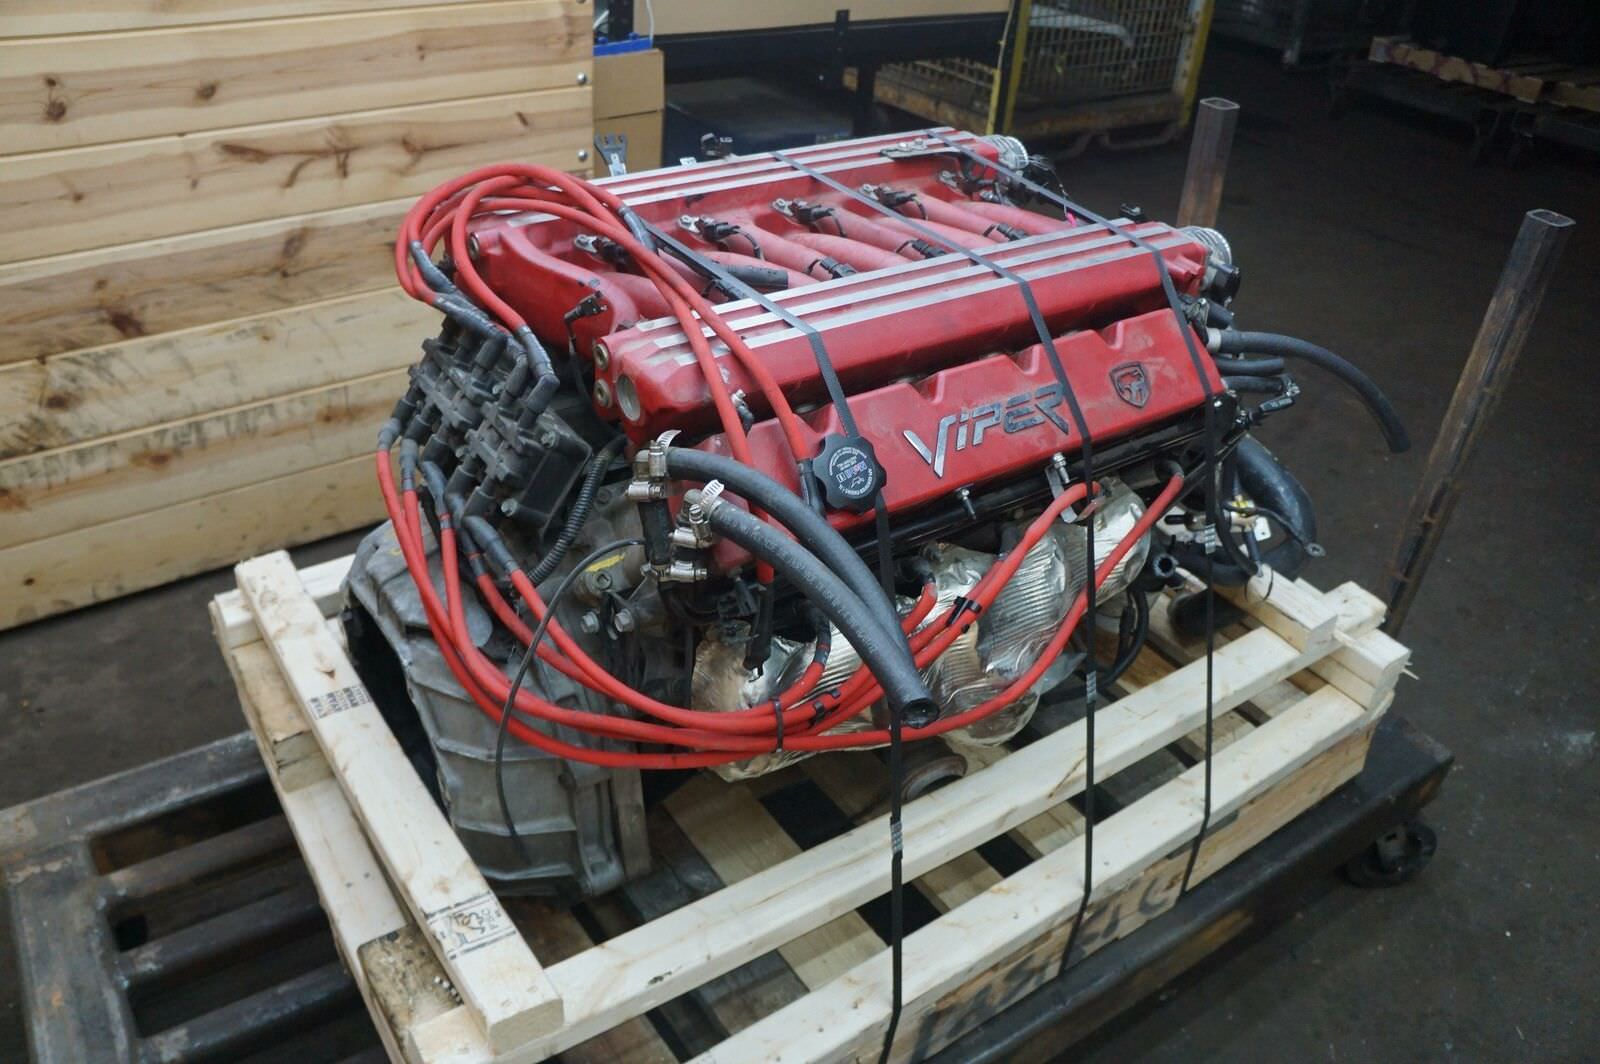 Dodge Truck With Viper Engine For Sale 83 L V10 In A 2004 Viper Engine Bay